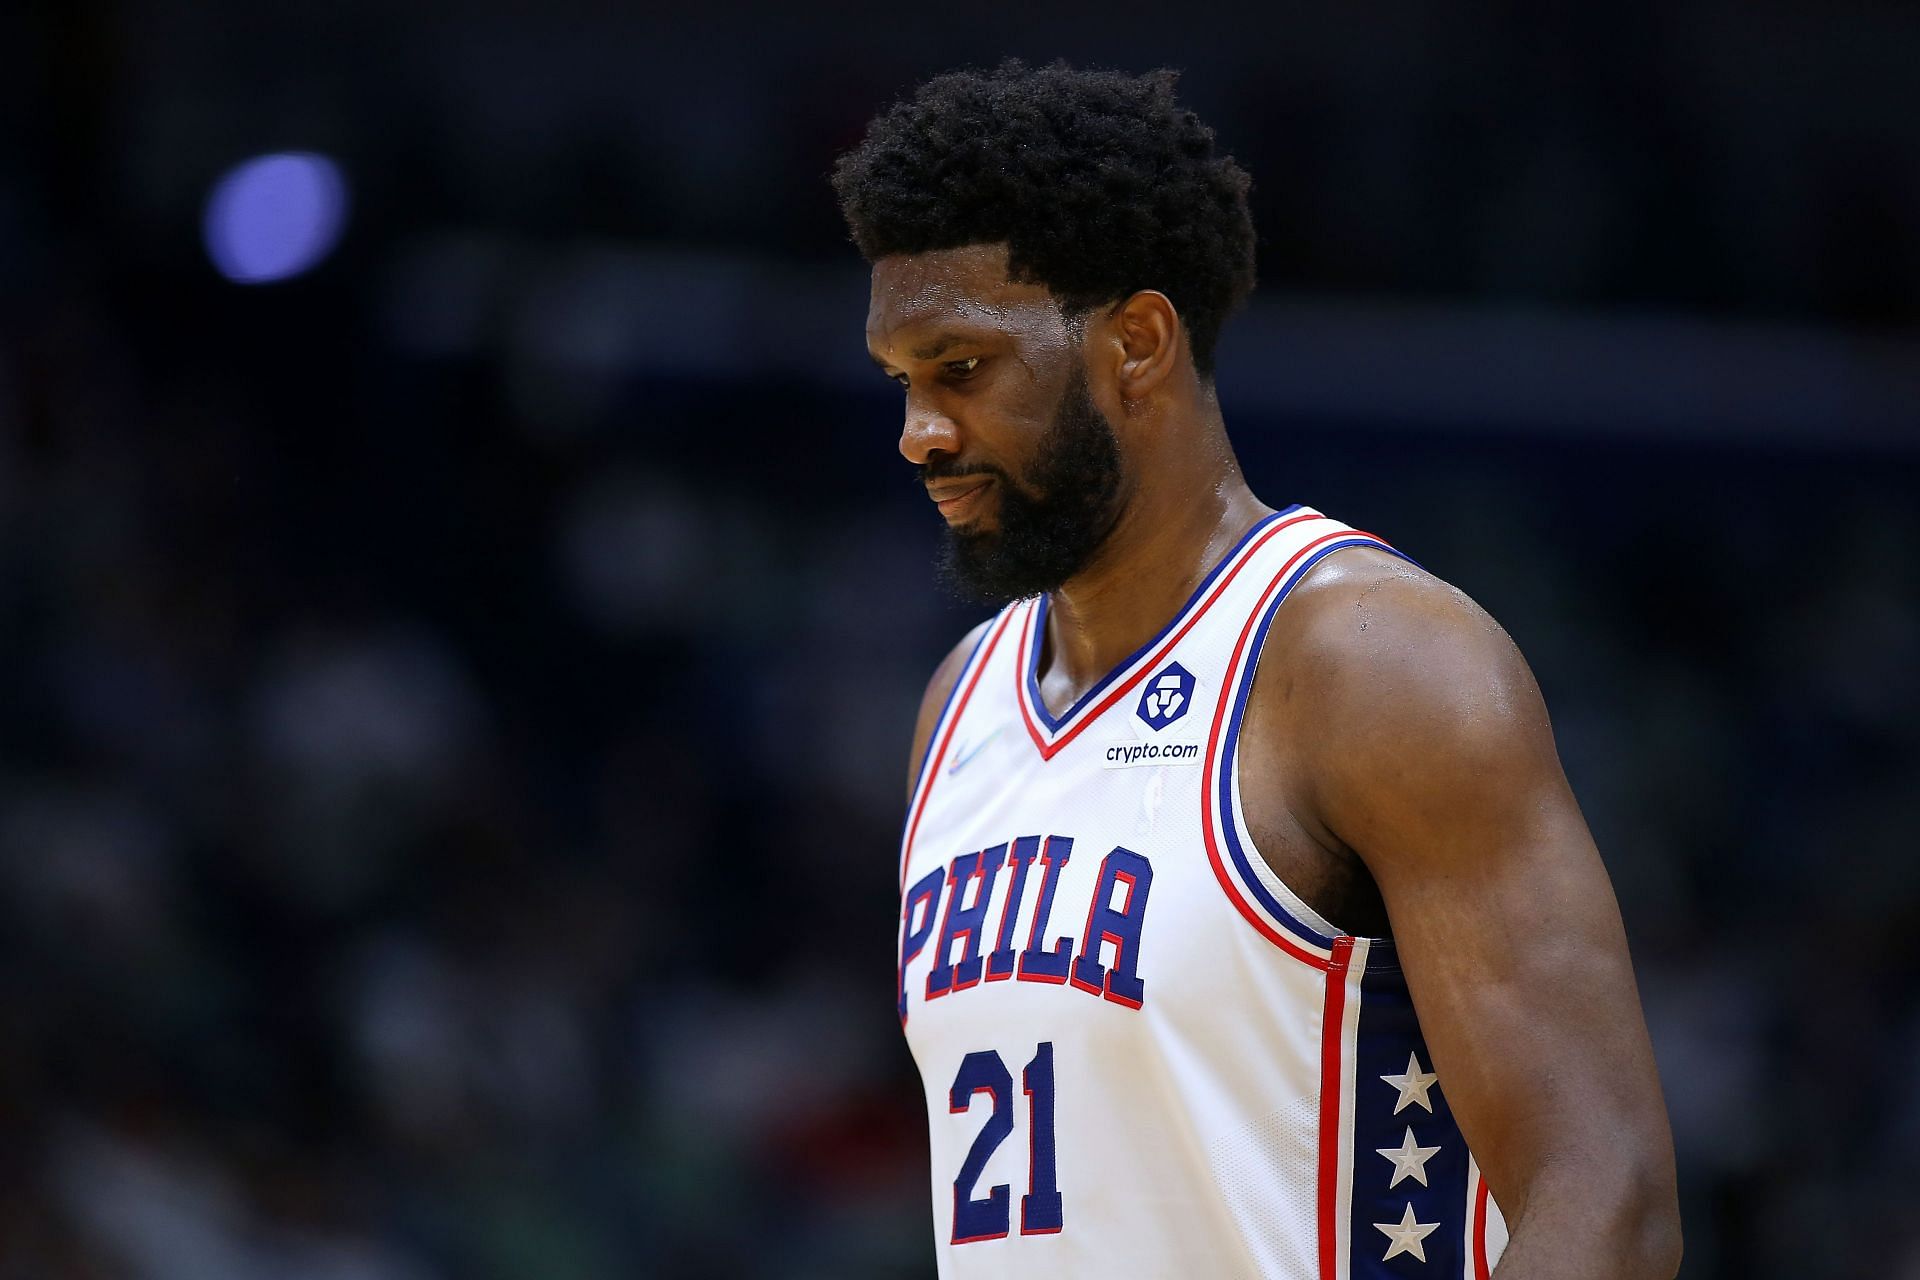 Joel Embiid has been marked questionable in the game against the Atlanta Hawks